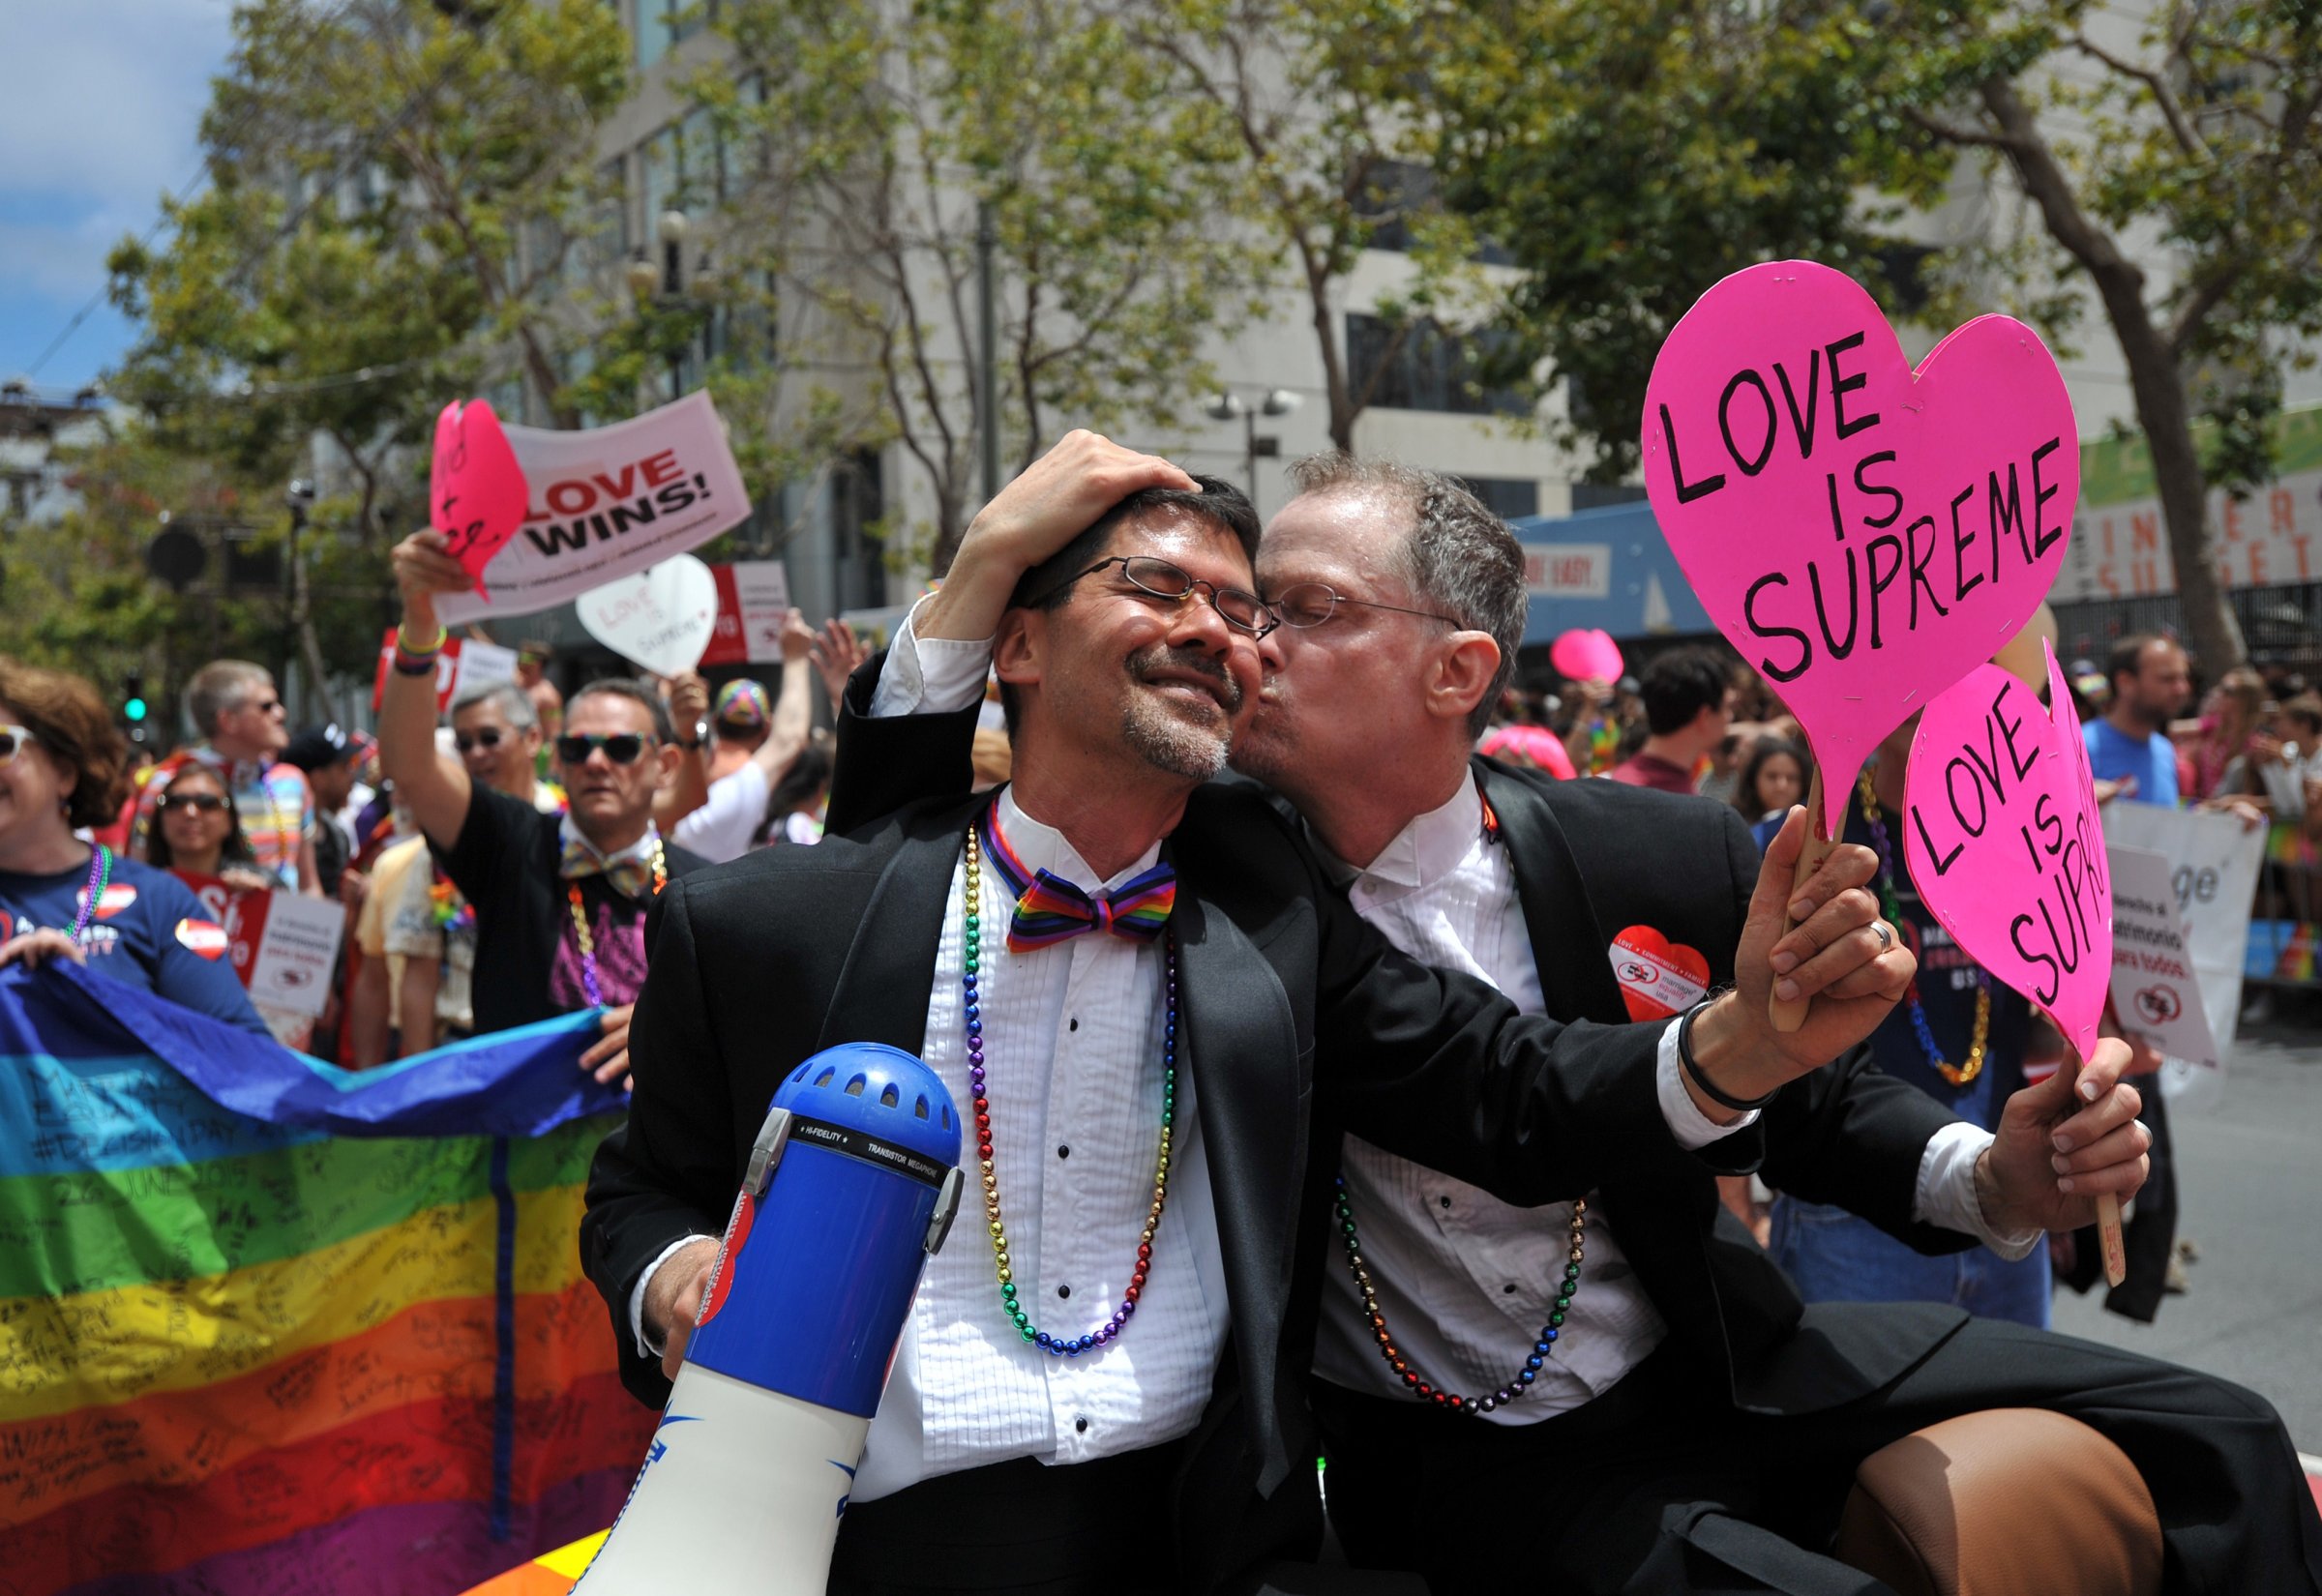 Stuart Gaffney (L) and John Lewis, plaintiffs in the 2008 Defense of Marriage Act (DOMA) case, celebrate while traveling along Market Street during the annual Gay Pride Parade in San Francisco, California on June 28, 2015, two days after the US Supreme Court's landmark ruling legalizing same-sex marriage nationwide.